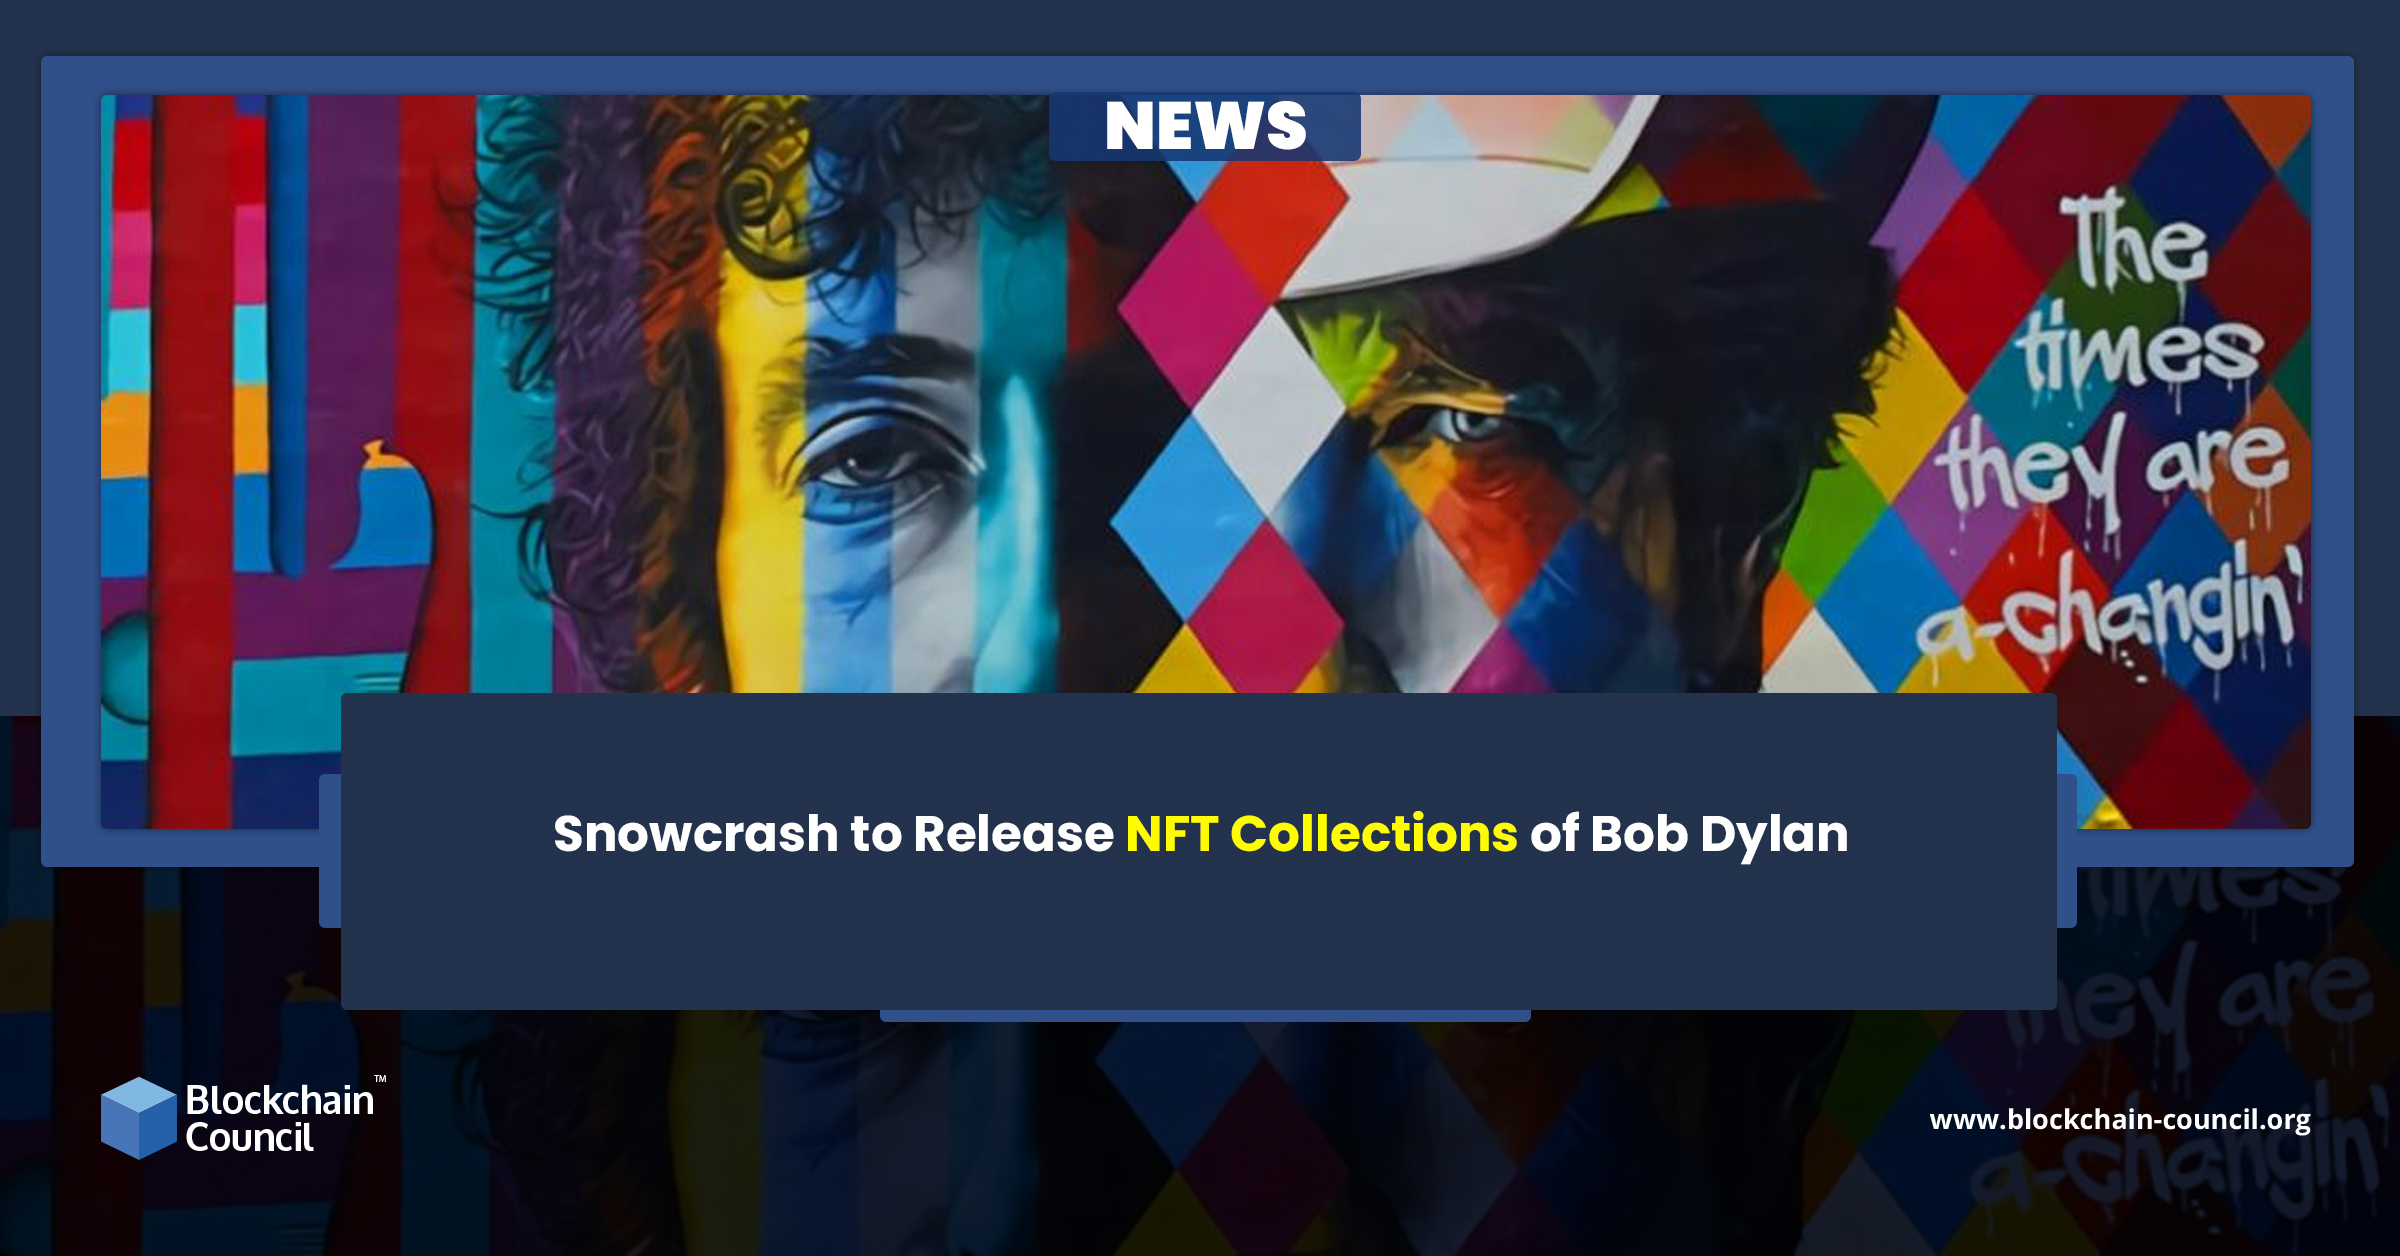 Snowcrash to Release NFT Collections of Bob Dylan